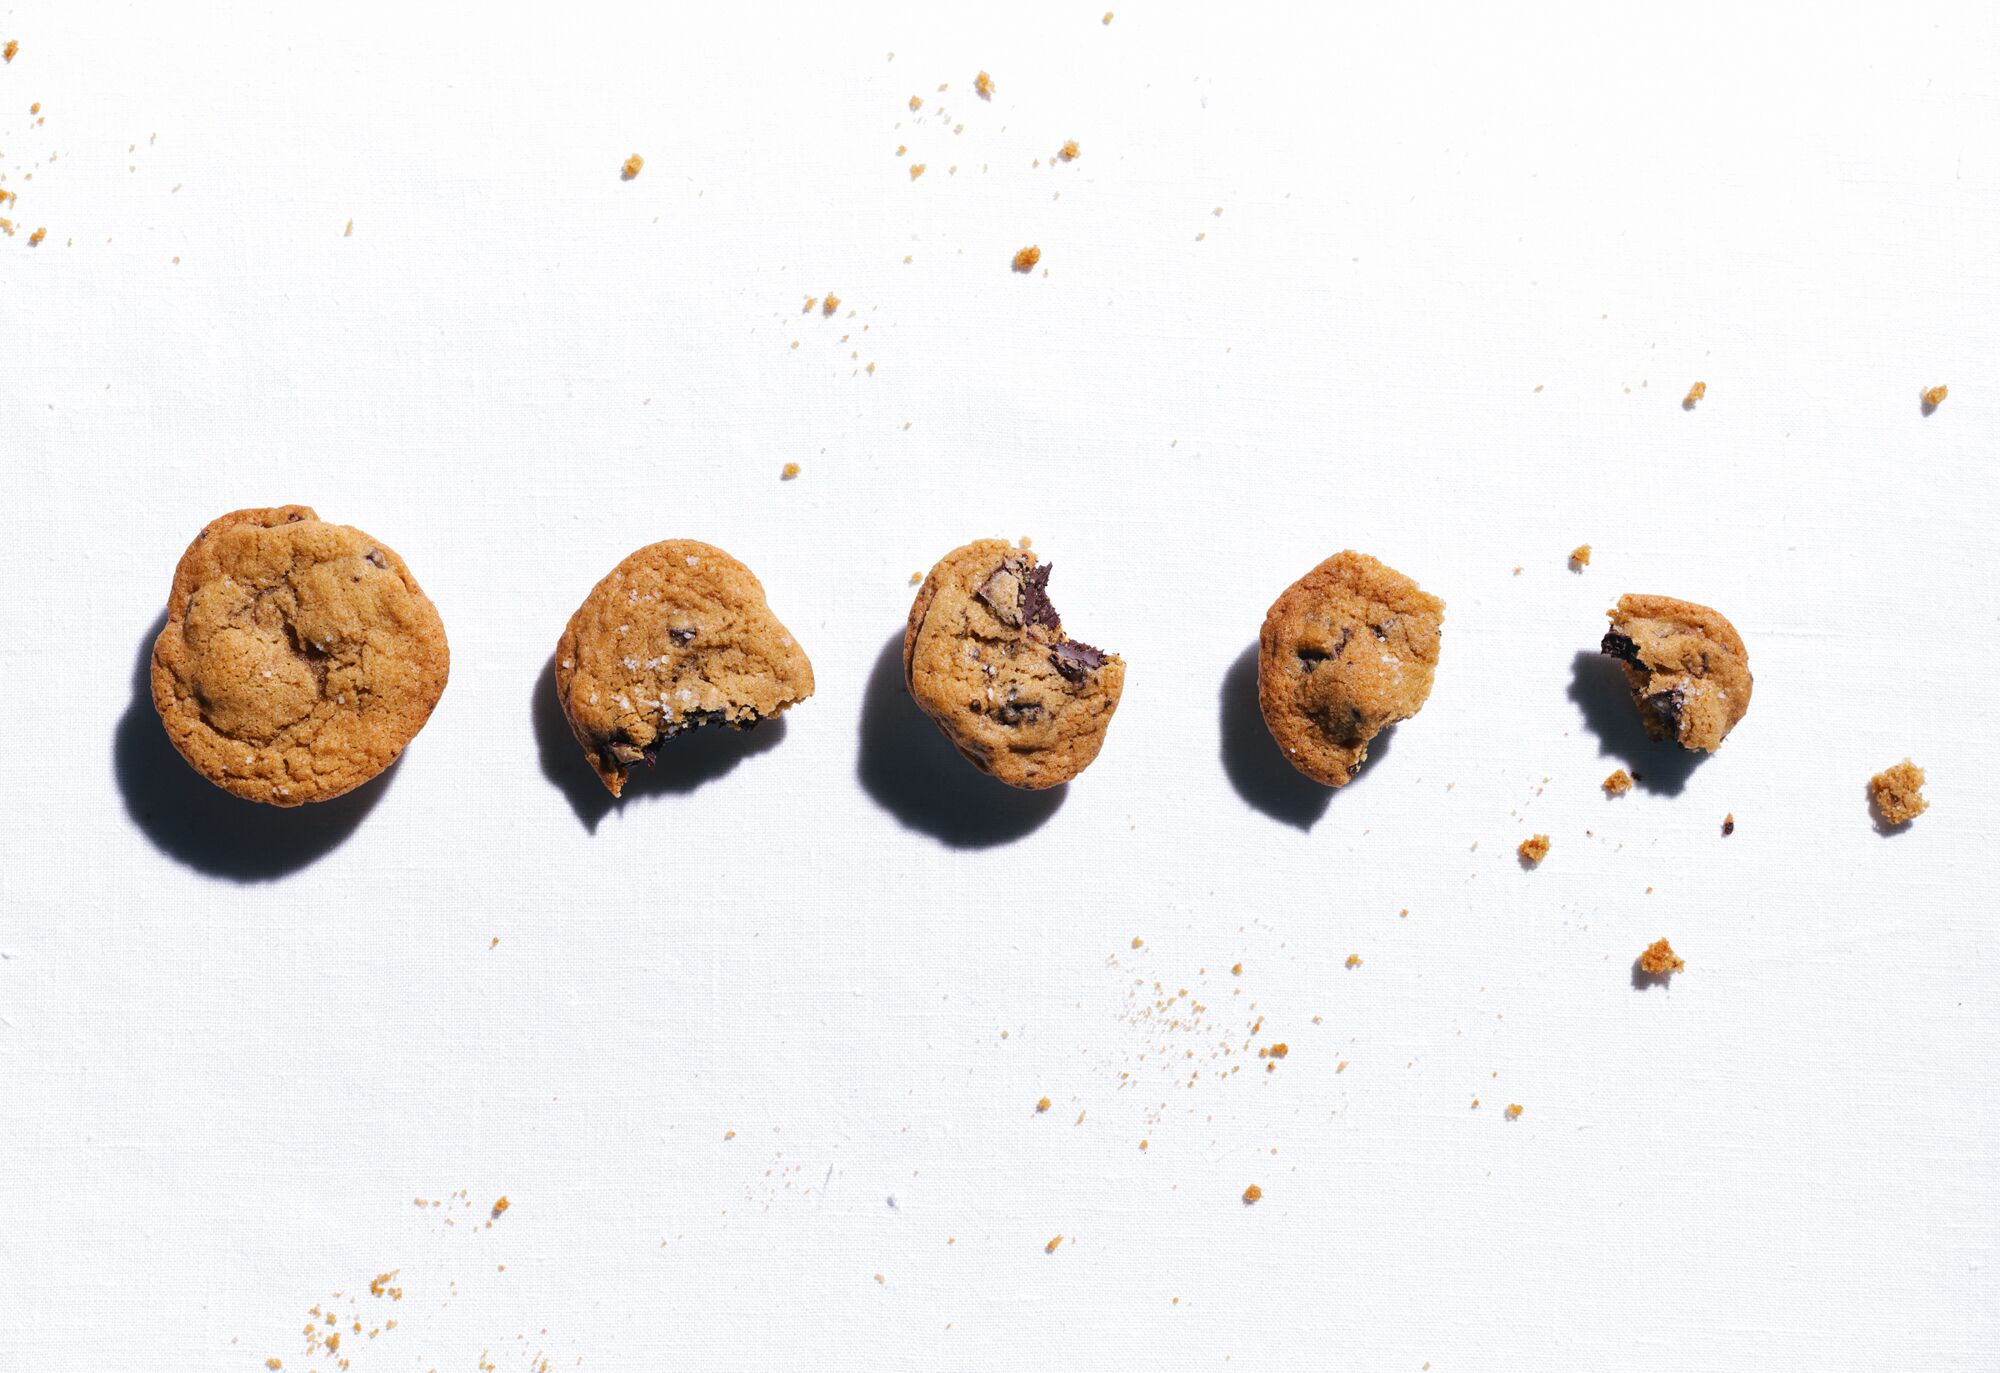 A line of chocolate chip cookies, diminishing in size.